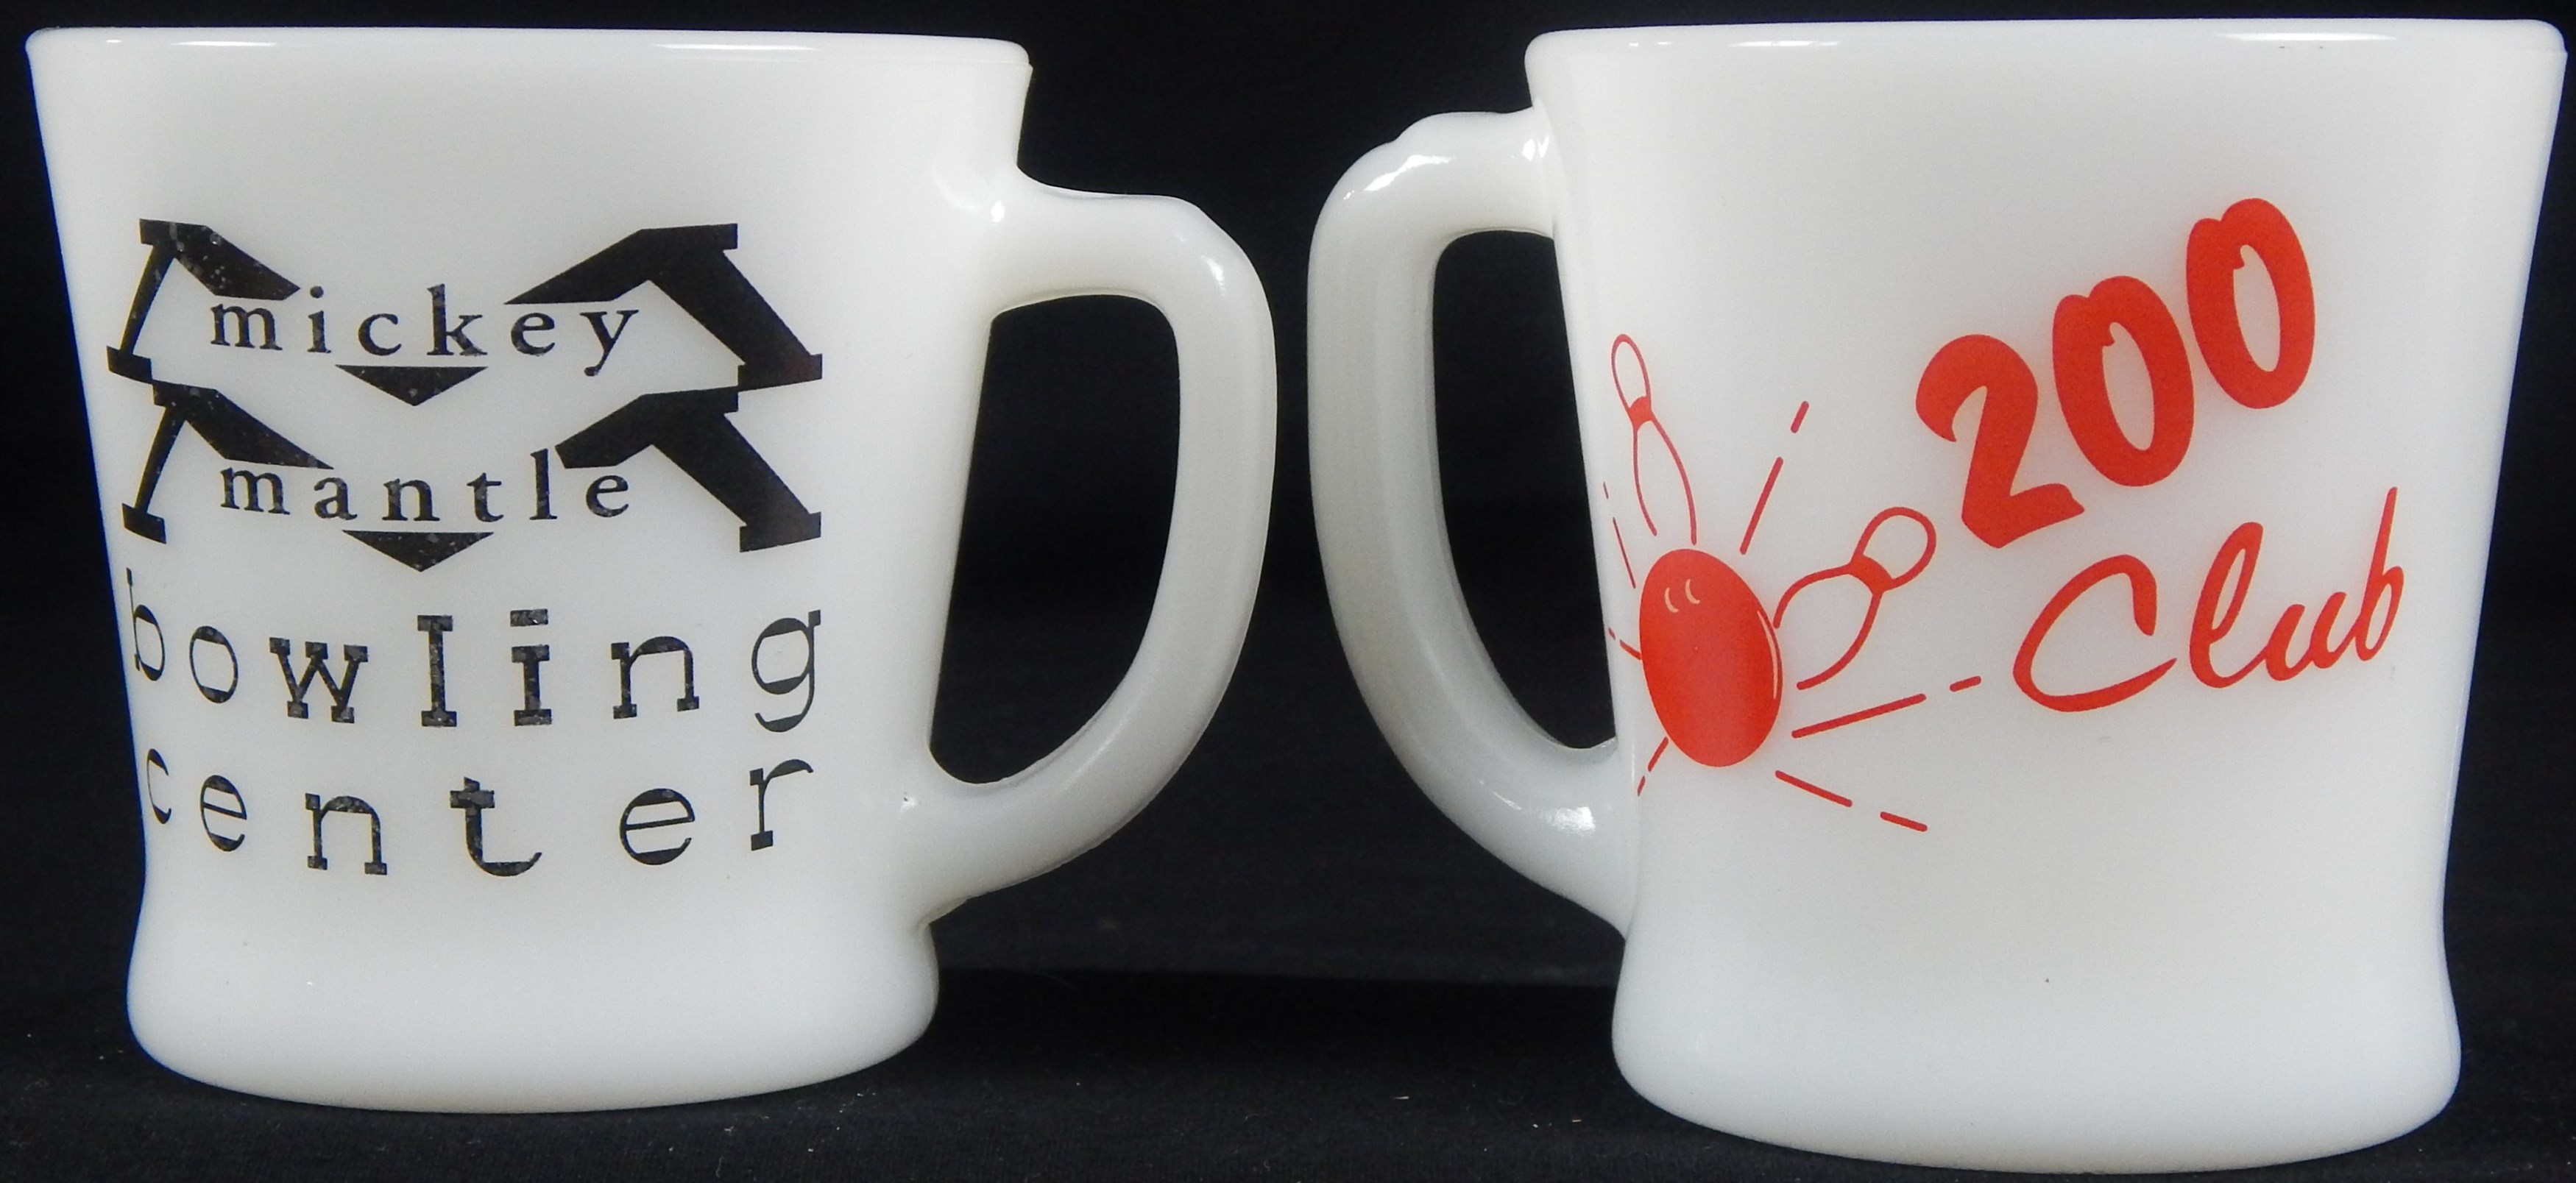 Best of the Best - Circa 1961 Mickey Mantle Bowling Alley 200 & 300 Game Coffee Cups (2)